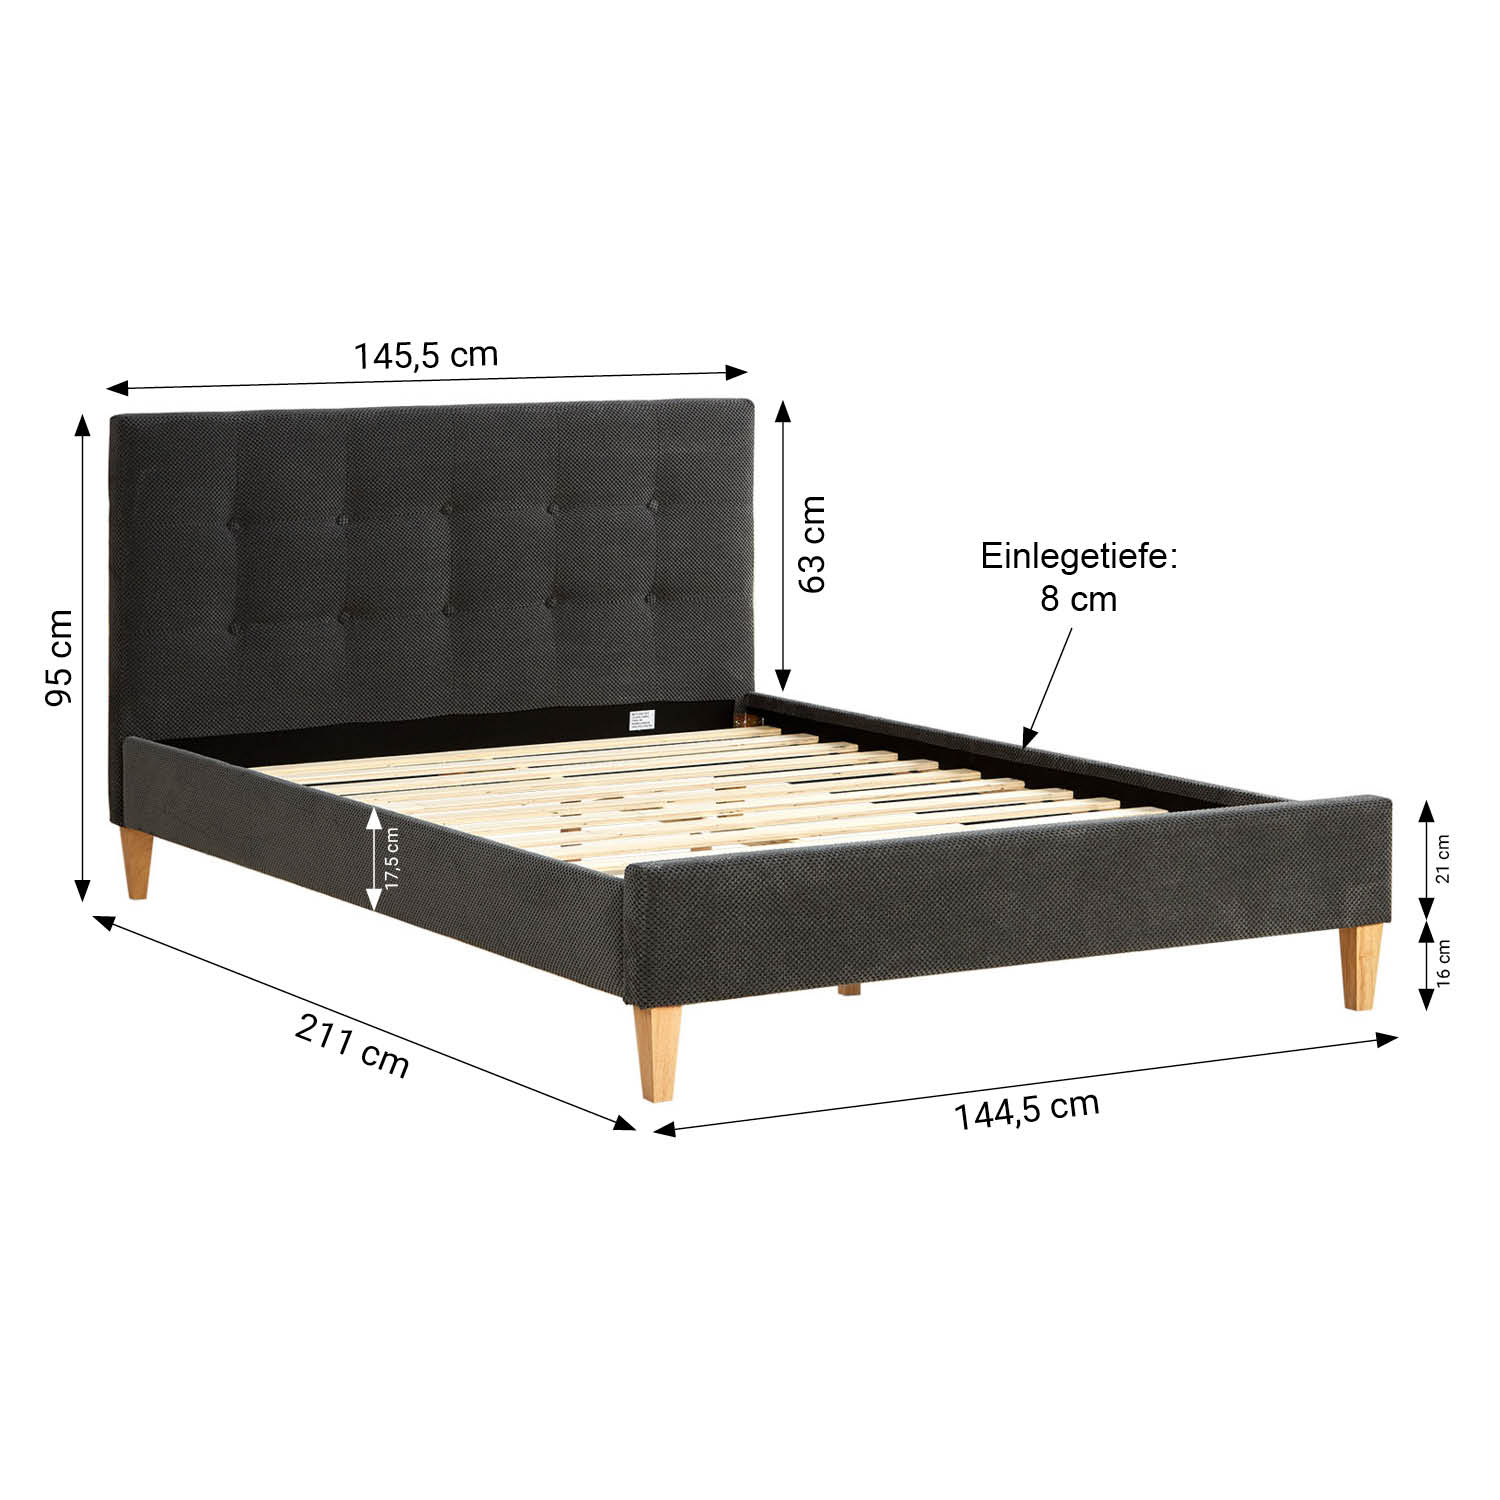 Small Double Bed 140x200 cm Anthracite Velvet Upholstered Bed with Slatted Frame Fabric Bed Frame Grey